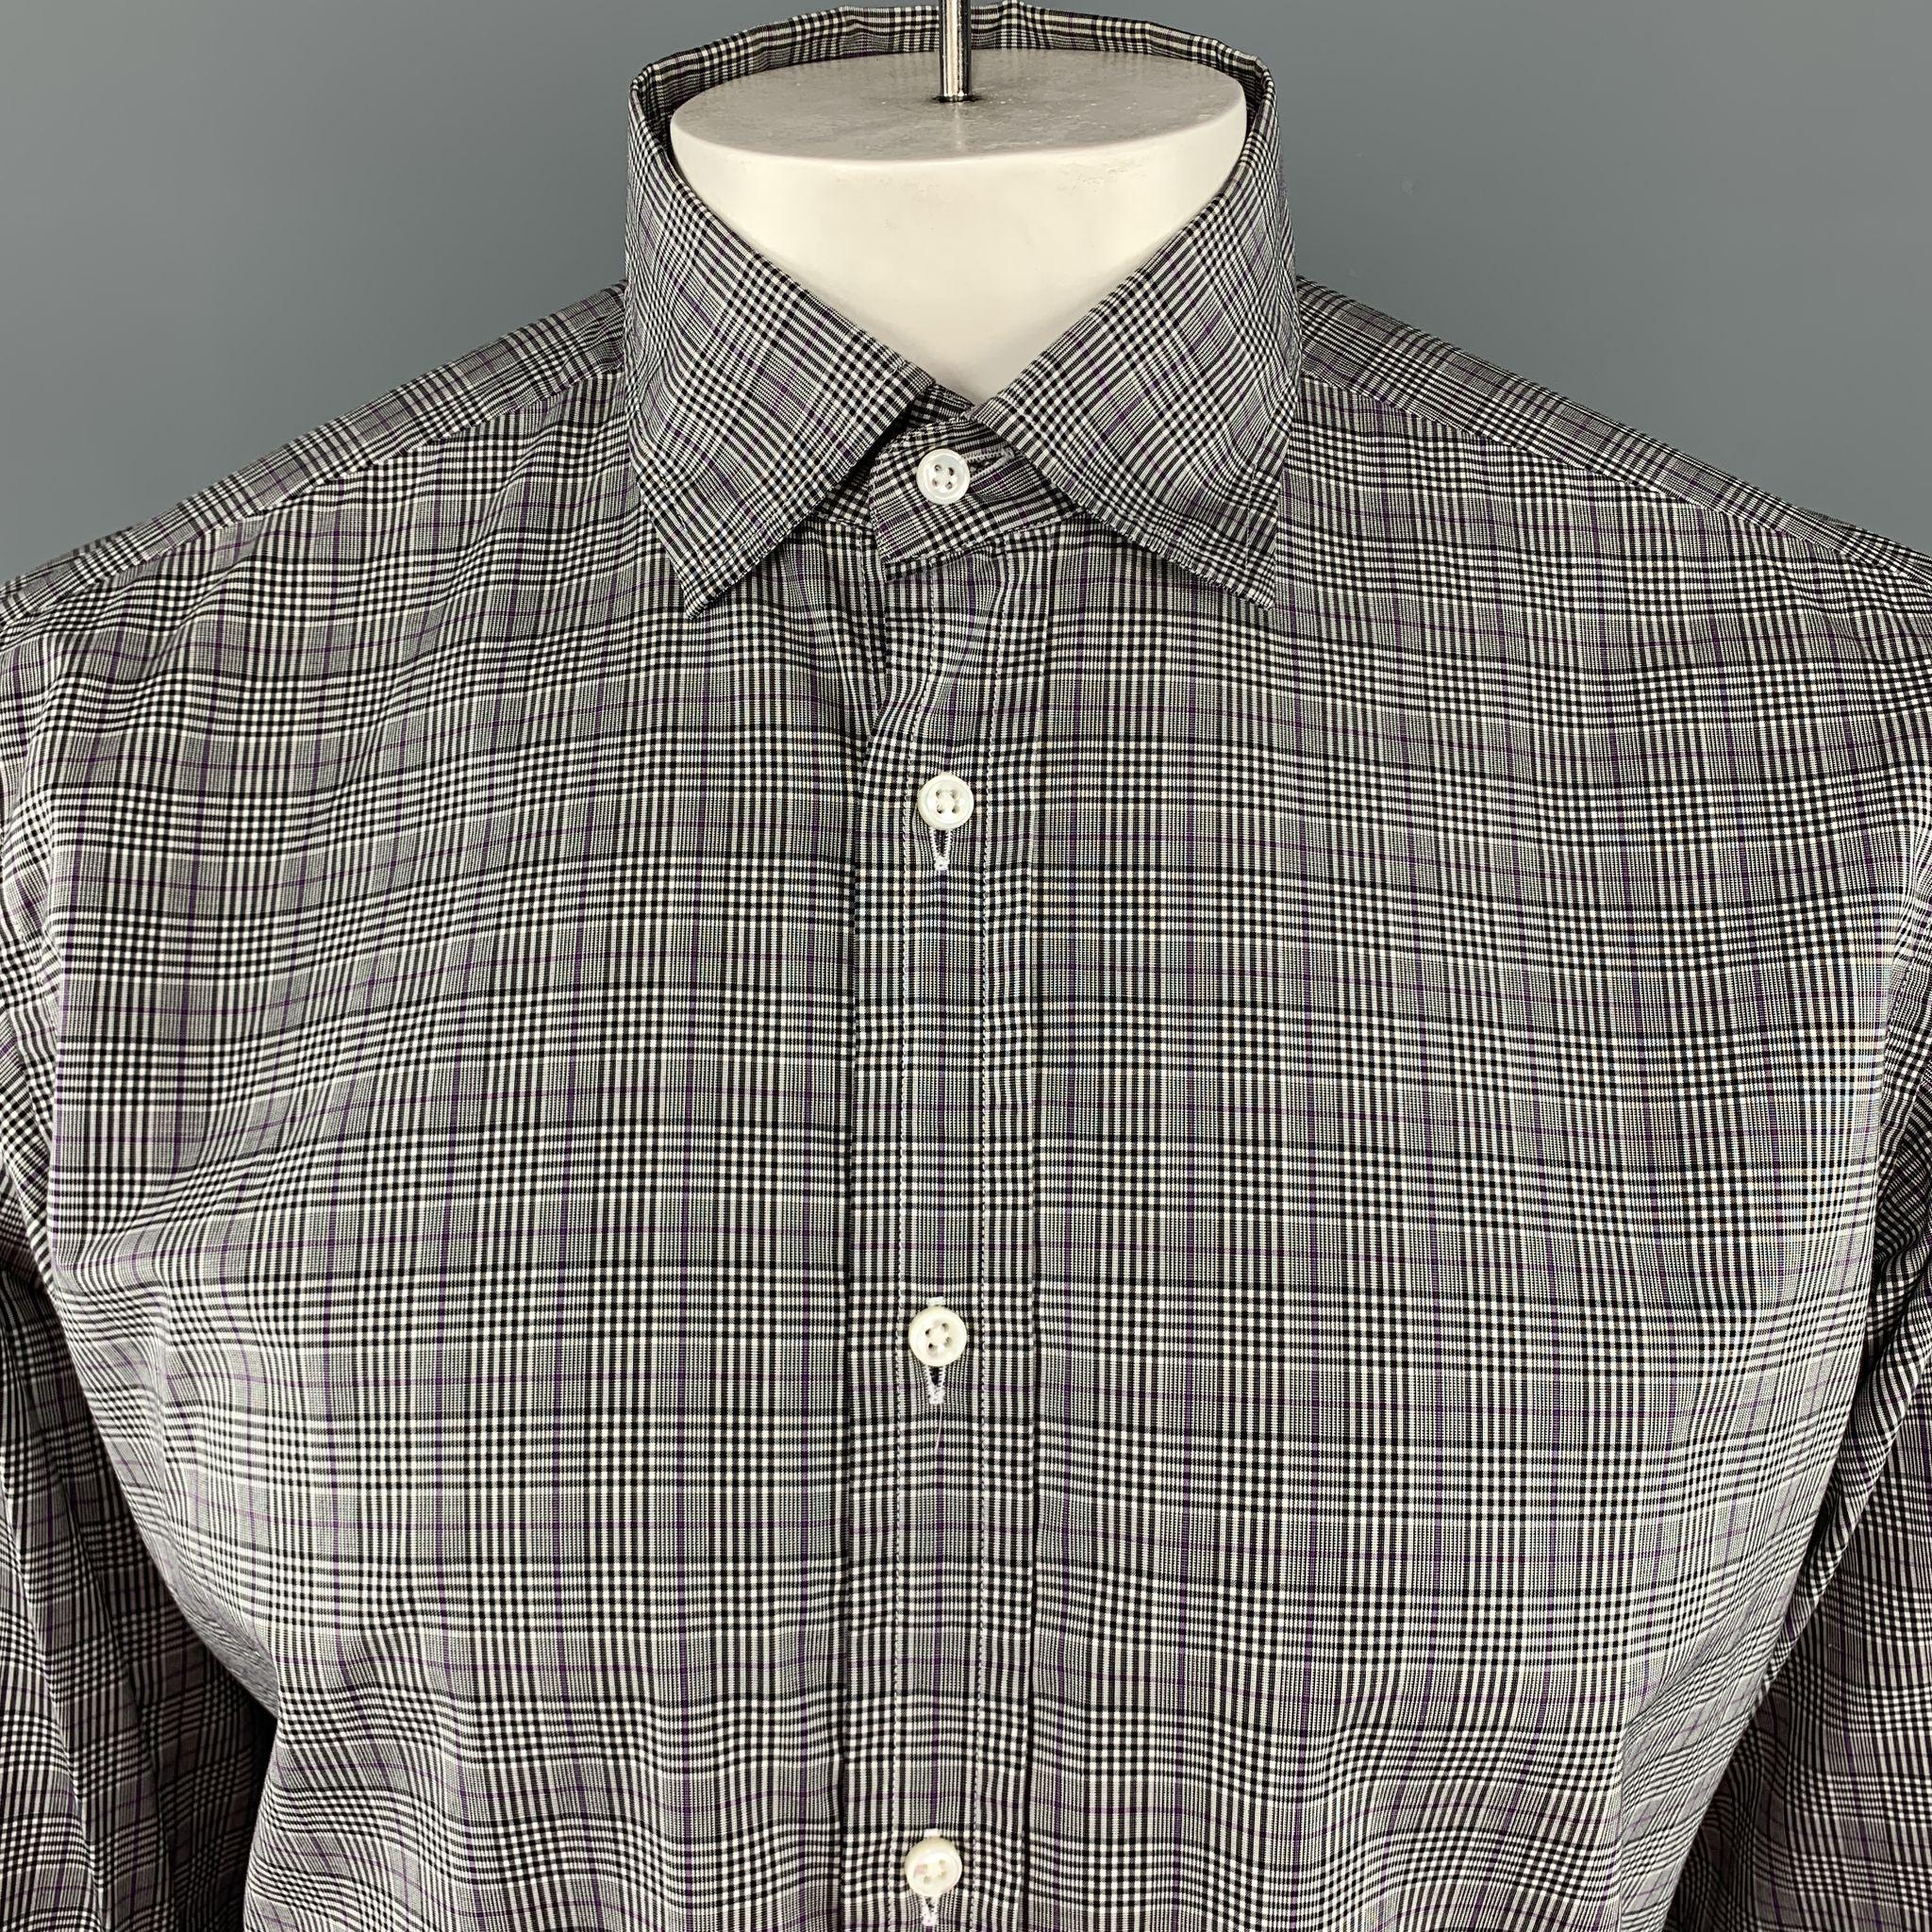 RALPH LAUREN PURPLE LABEL Long Sleeve Shirt comes in black and white tones in a plaid cotton material, with a pointed collar, buttoned cuffs, button up. Made in Italy.

Excellent Pre-Owned Condition.
Marked: M

Measurements:

Shoulder: 16.5 in.